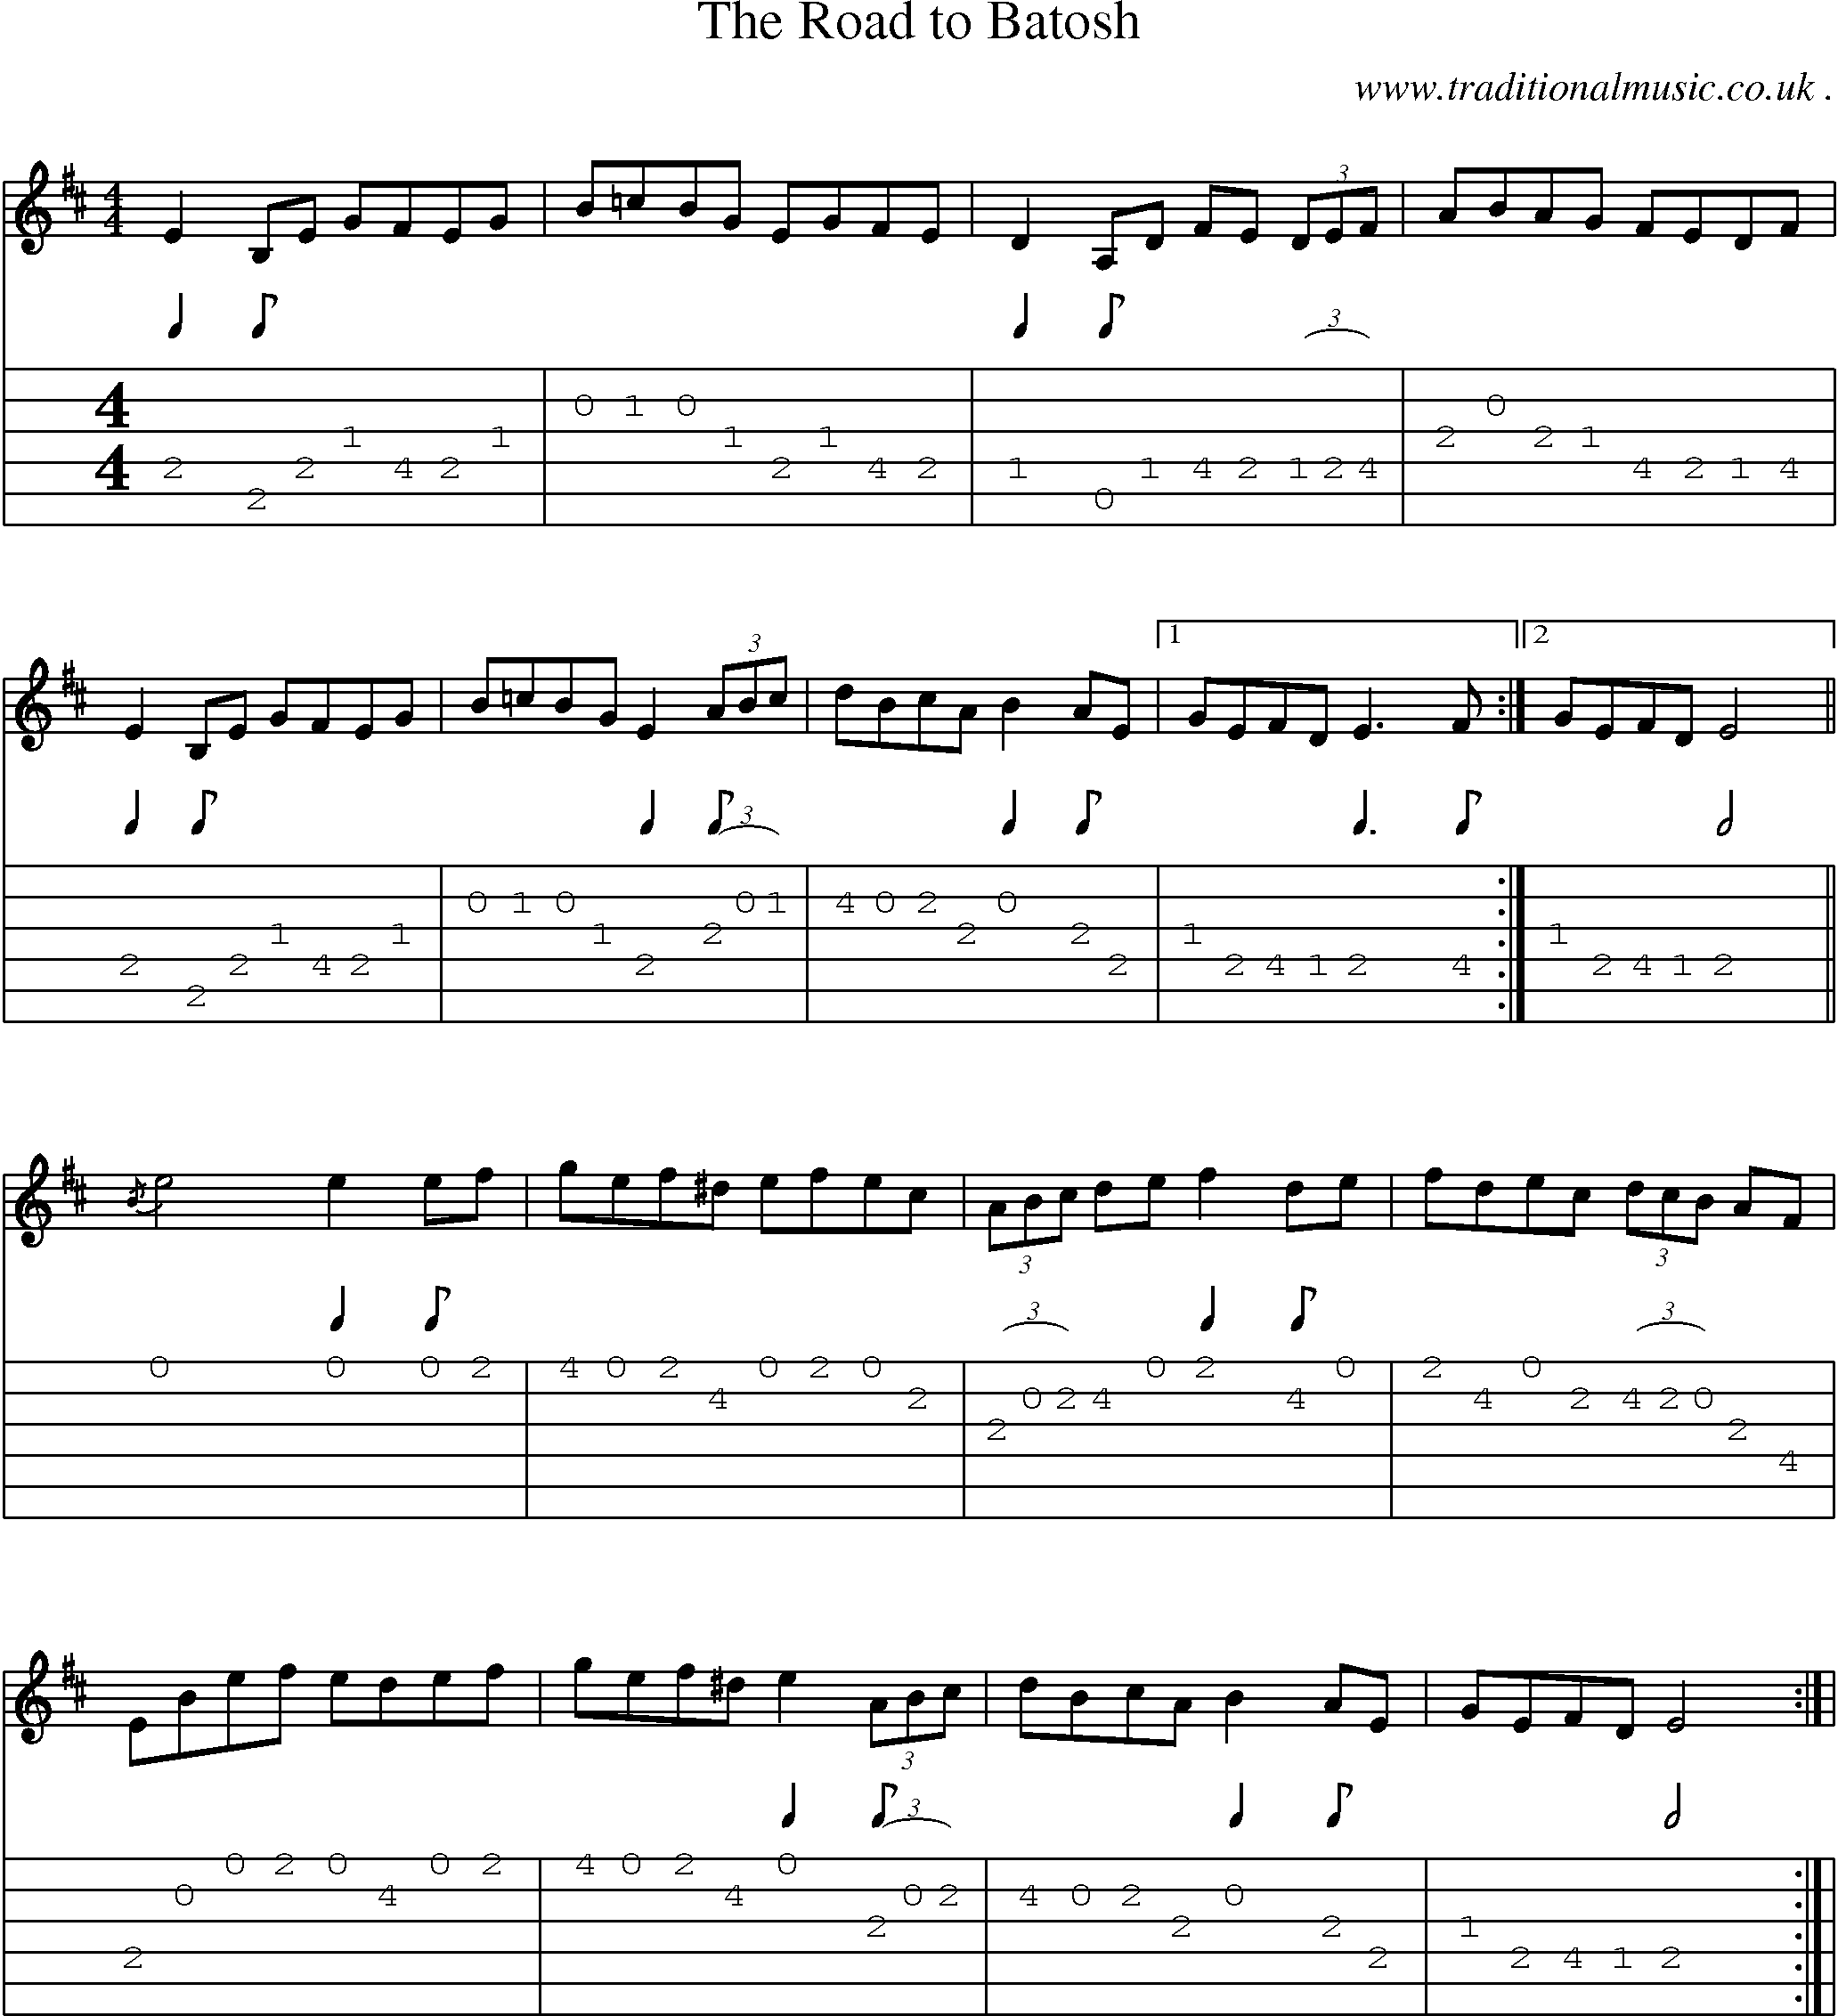 Music Score and Guitar Tabs for The Road To Batosh